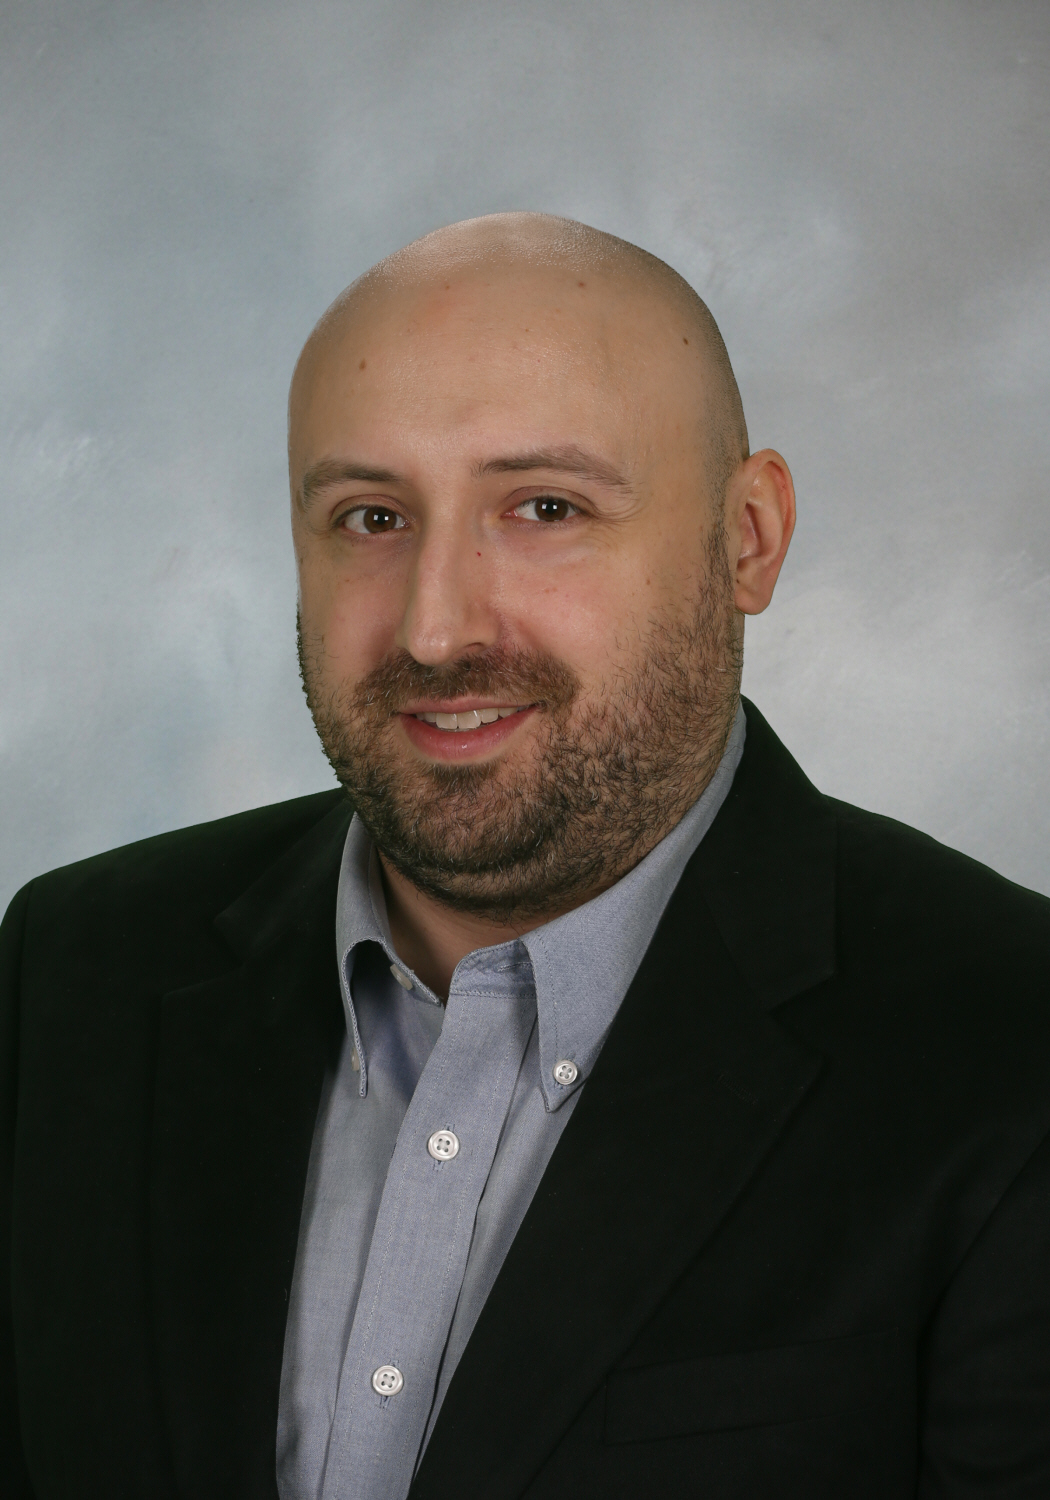 LenderClose has announced the addition of Software Engineer Steven Krossner to its expanding team in Des Moines, Iowa